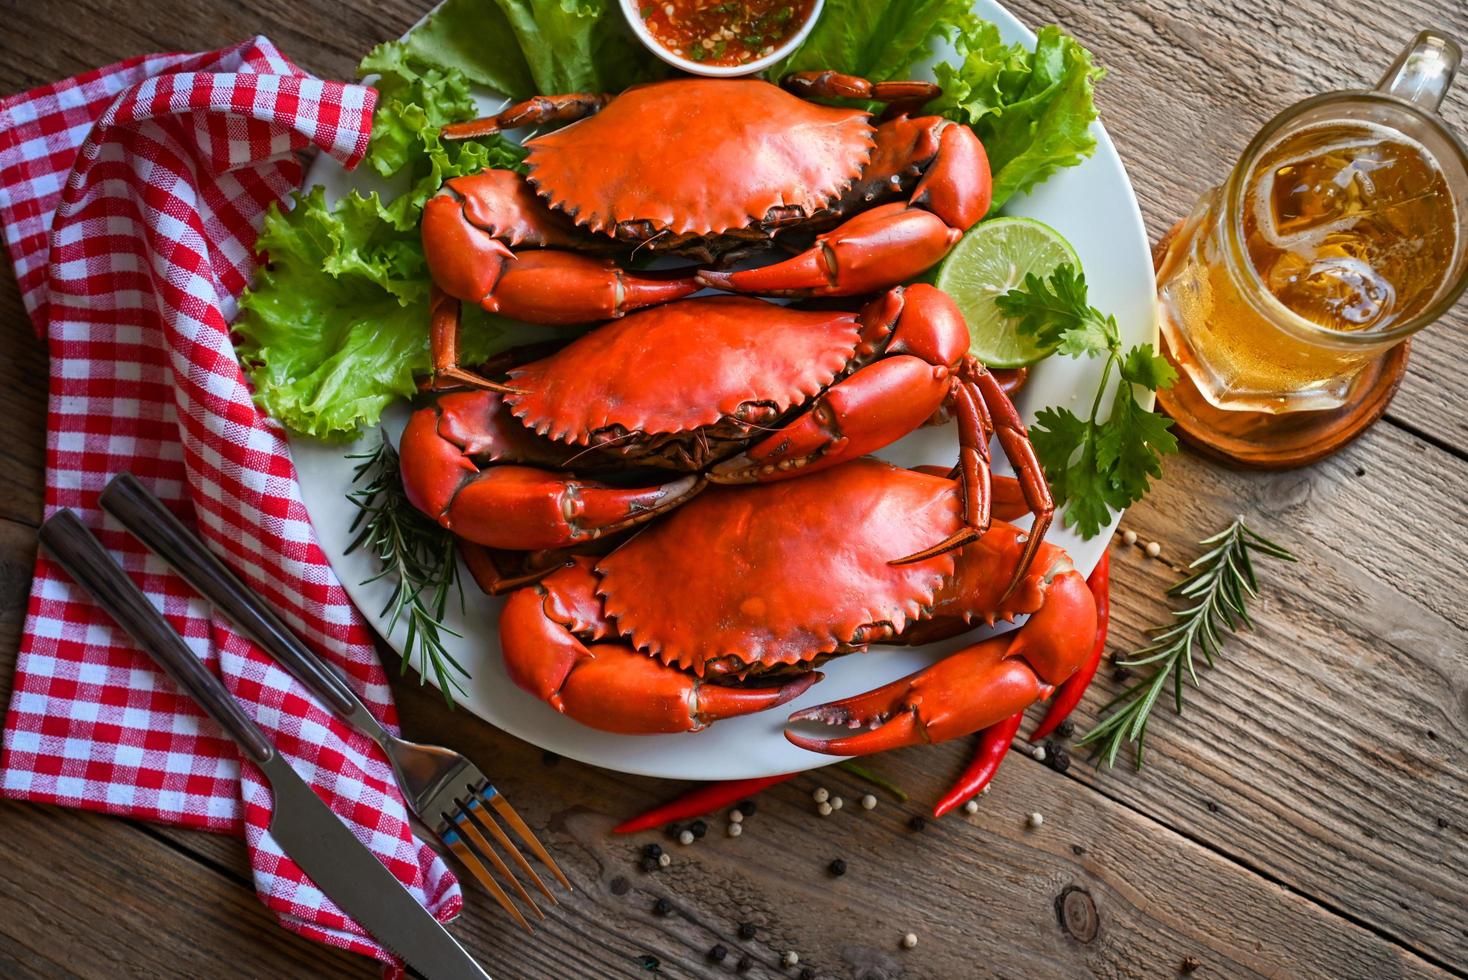 seafood plate with herbs spices rosemary lemon lime salad lettuce vegetable, fresh crab on white plate seafood sauce and mug beer glass, crab cooking food boiled or steamed crab red in the restaurant photo